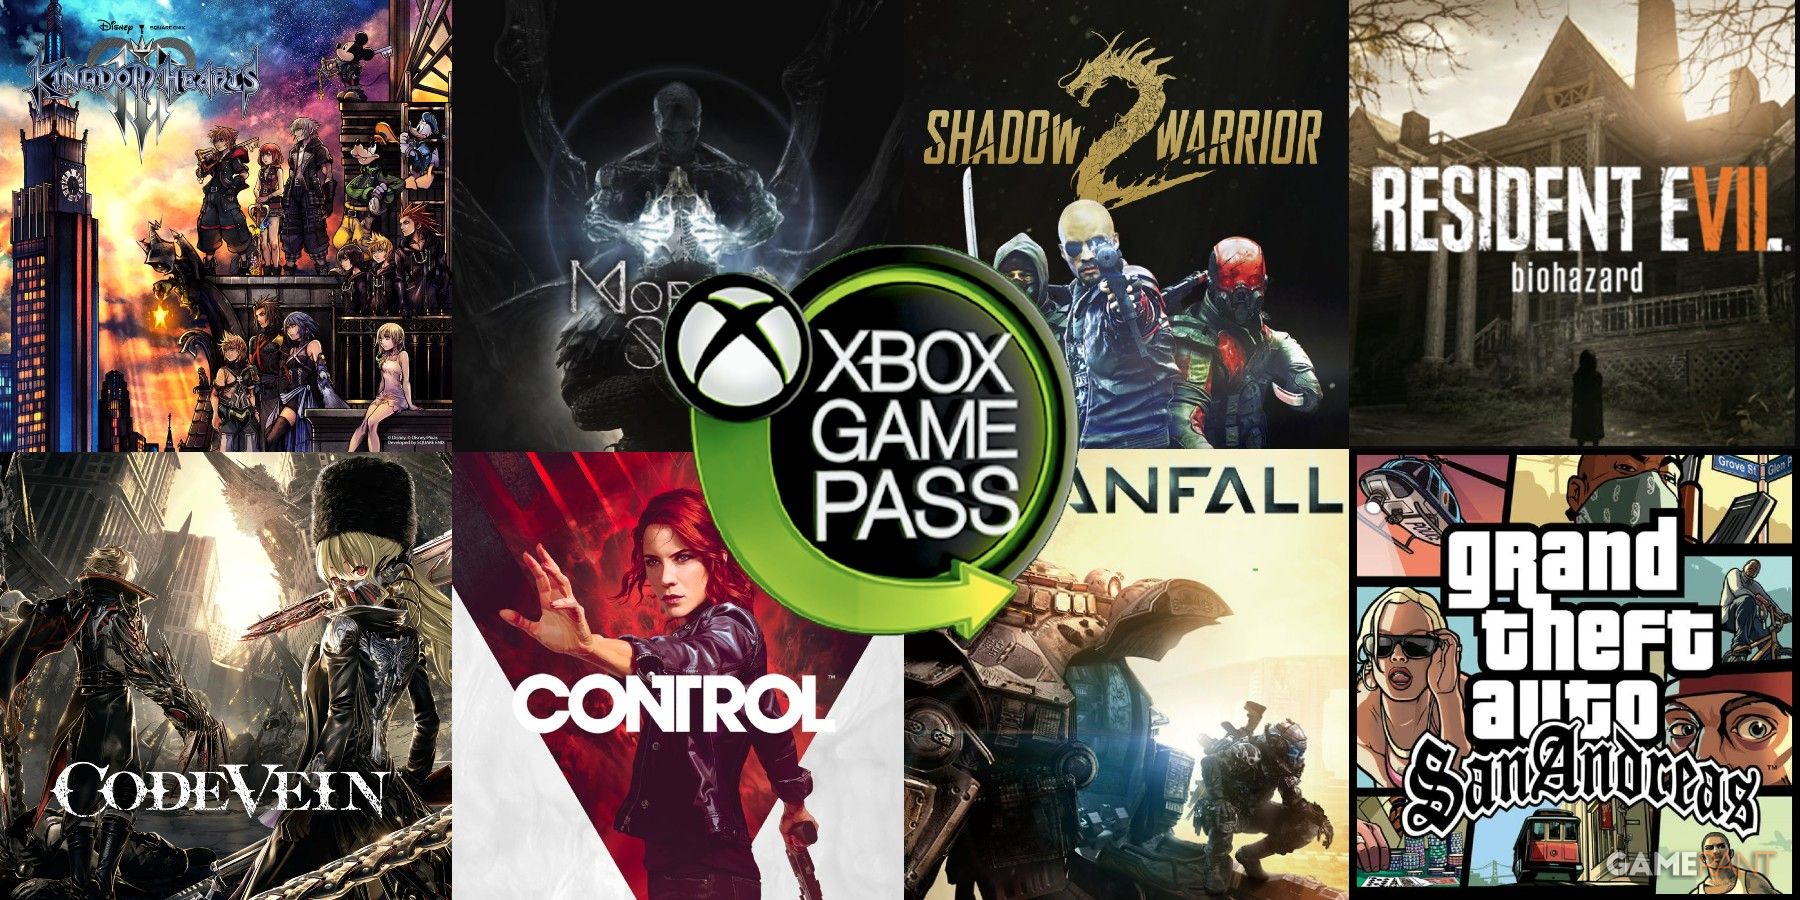 Xbox Game Pass January 2020 games include A Plague Tale